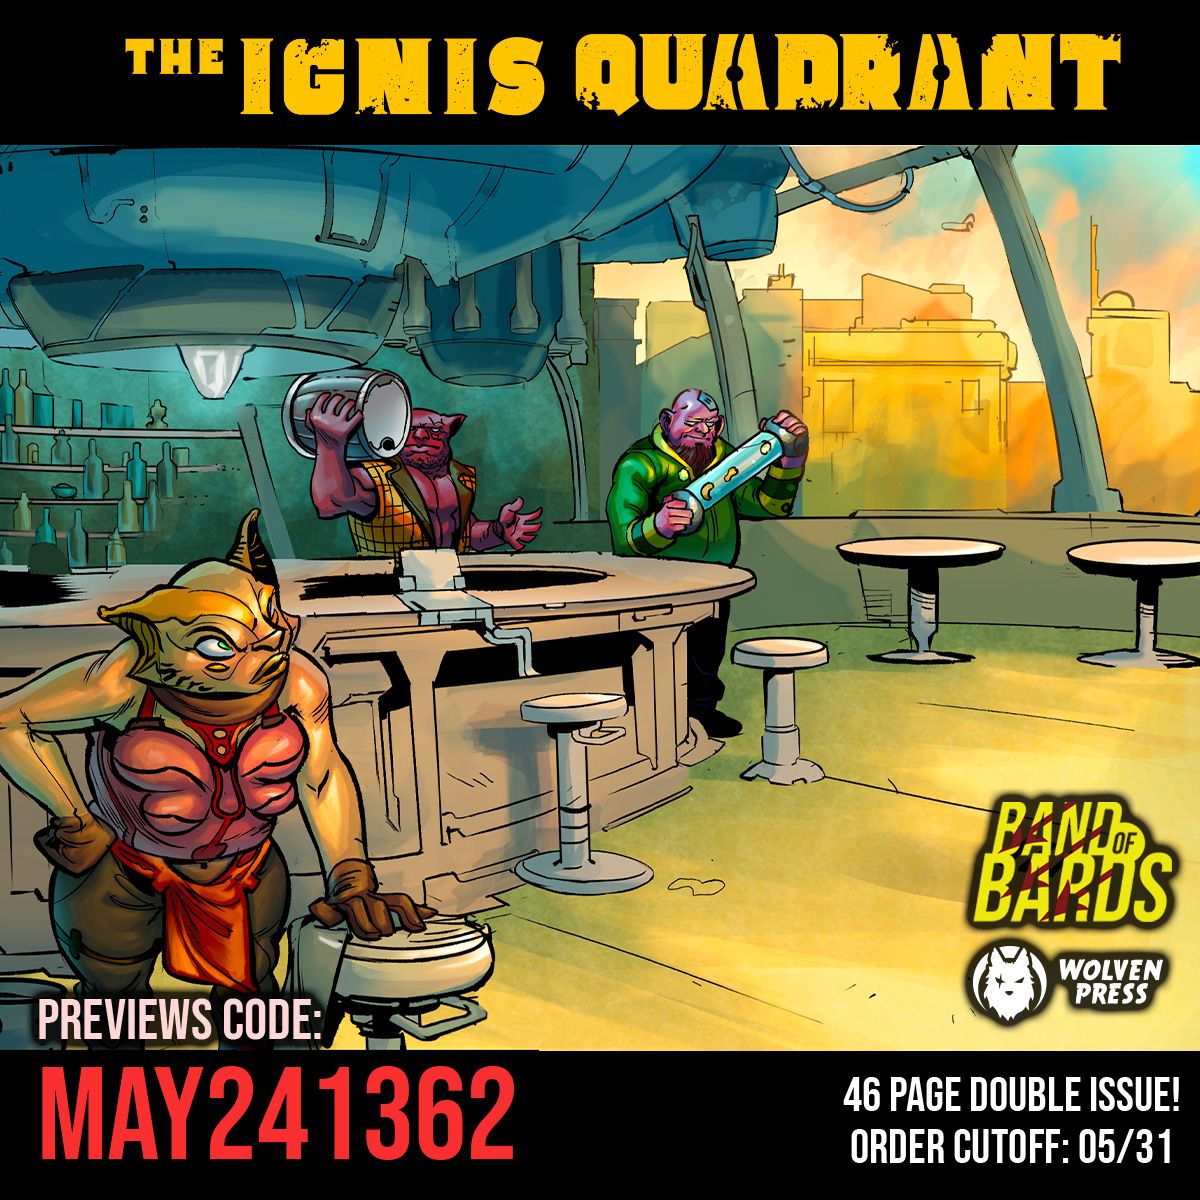 For fans of Firefly, Star Wars, and Cowboy Bebop: Your new favorite sci-fi space western!

THE IGNIS QUADRANT double-feature part 1 is still available to pre-order from your local shop from Band of Bards until the end of the month, just use previews code MAY241362